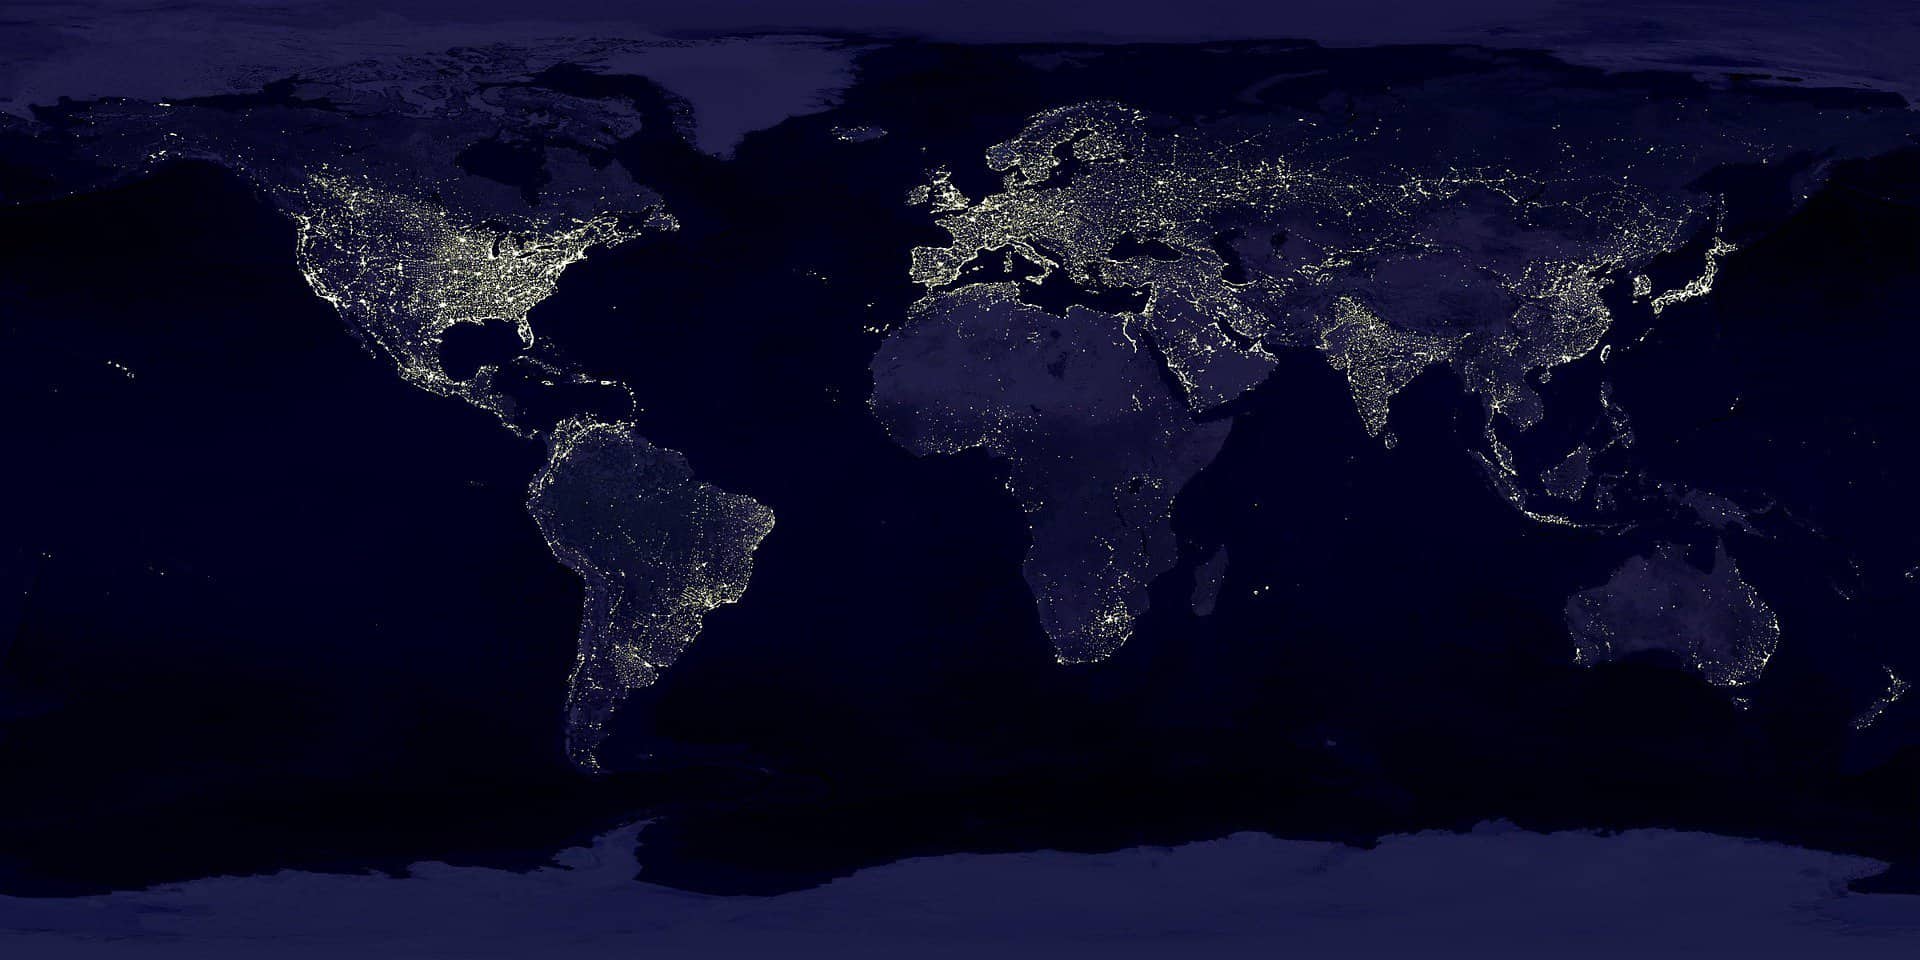 The earth and it's lights are seen from space at night providing the outlines of continents.